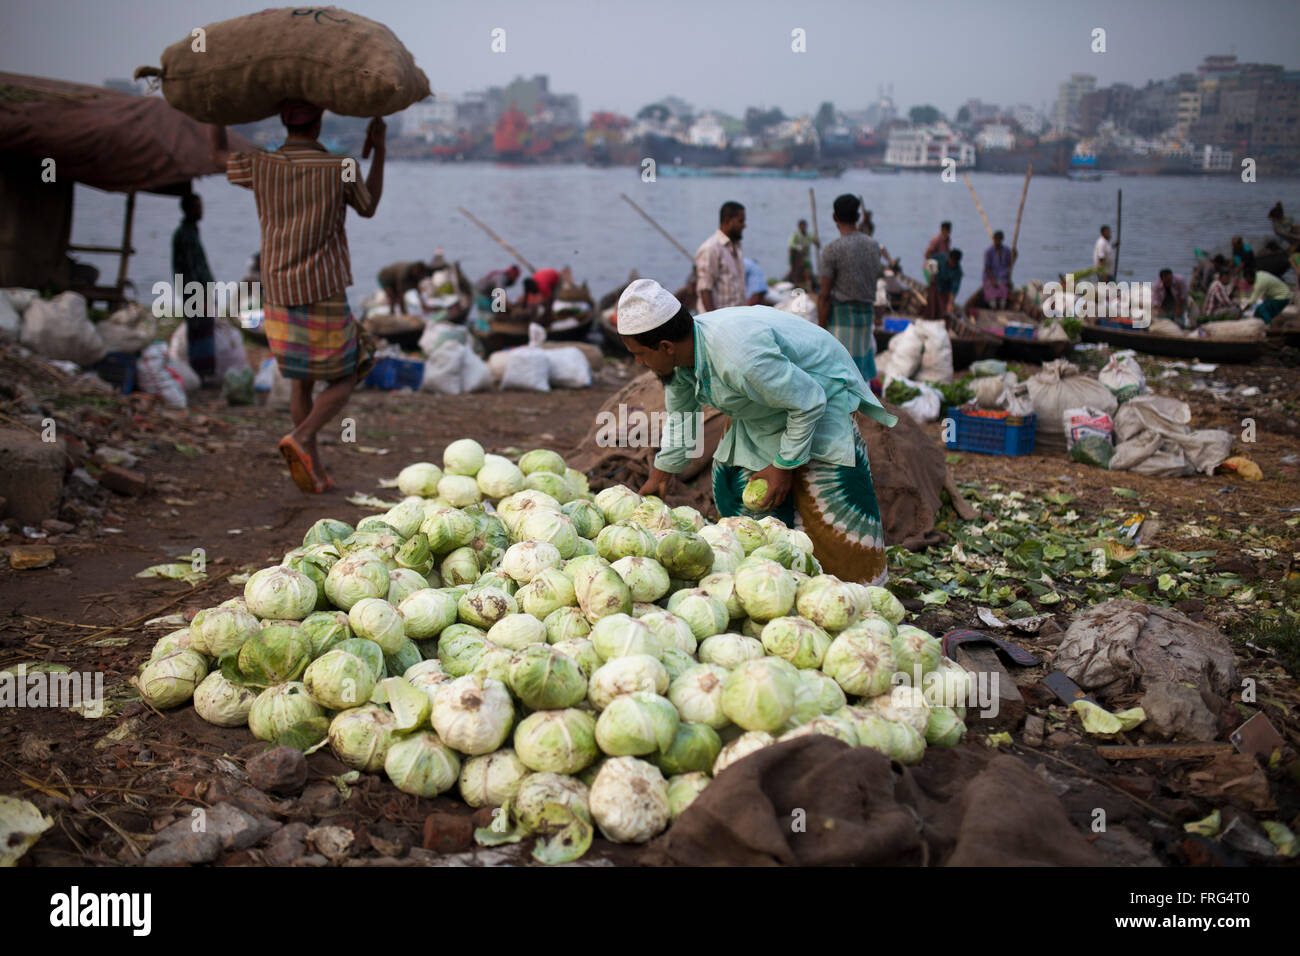 Dhaka, Bangladesh. 21st March, 2016. People collect vegetable from the wholesale market at the bank of river Buriganga in Dhaka, Bangladesh on March 21, 2016. A large swathe of the Buriganga River which is the lifeline of the capital has turned pitch-black with toxic waste, oil and chemicals flowing into it from industrial units.  Buriganga river, which flows by Dhaka is now one of the most polluted and biologically dead rivers in Bangladesh. Credit:  zakir hossain chowdhury zakir/Alamy Live News Stock Photo